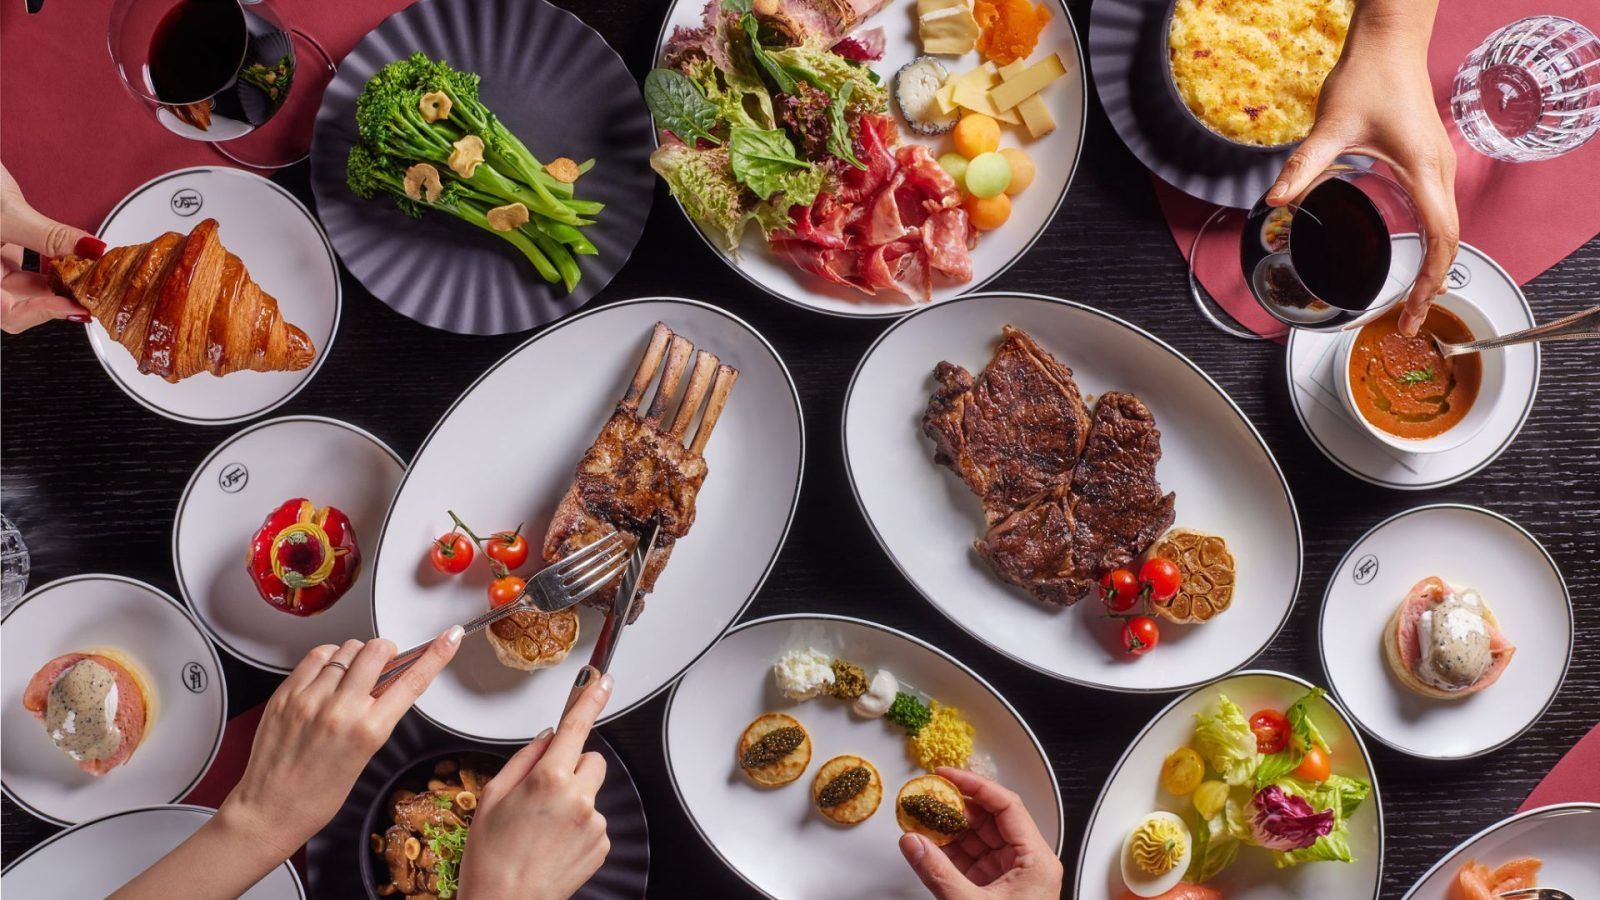 The best Easter brunches in Hong Kong to enjoy over the long weekend